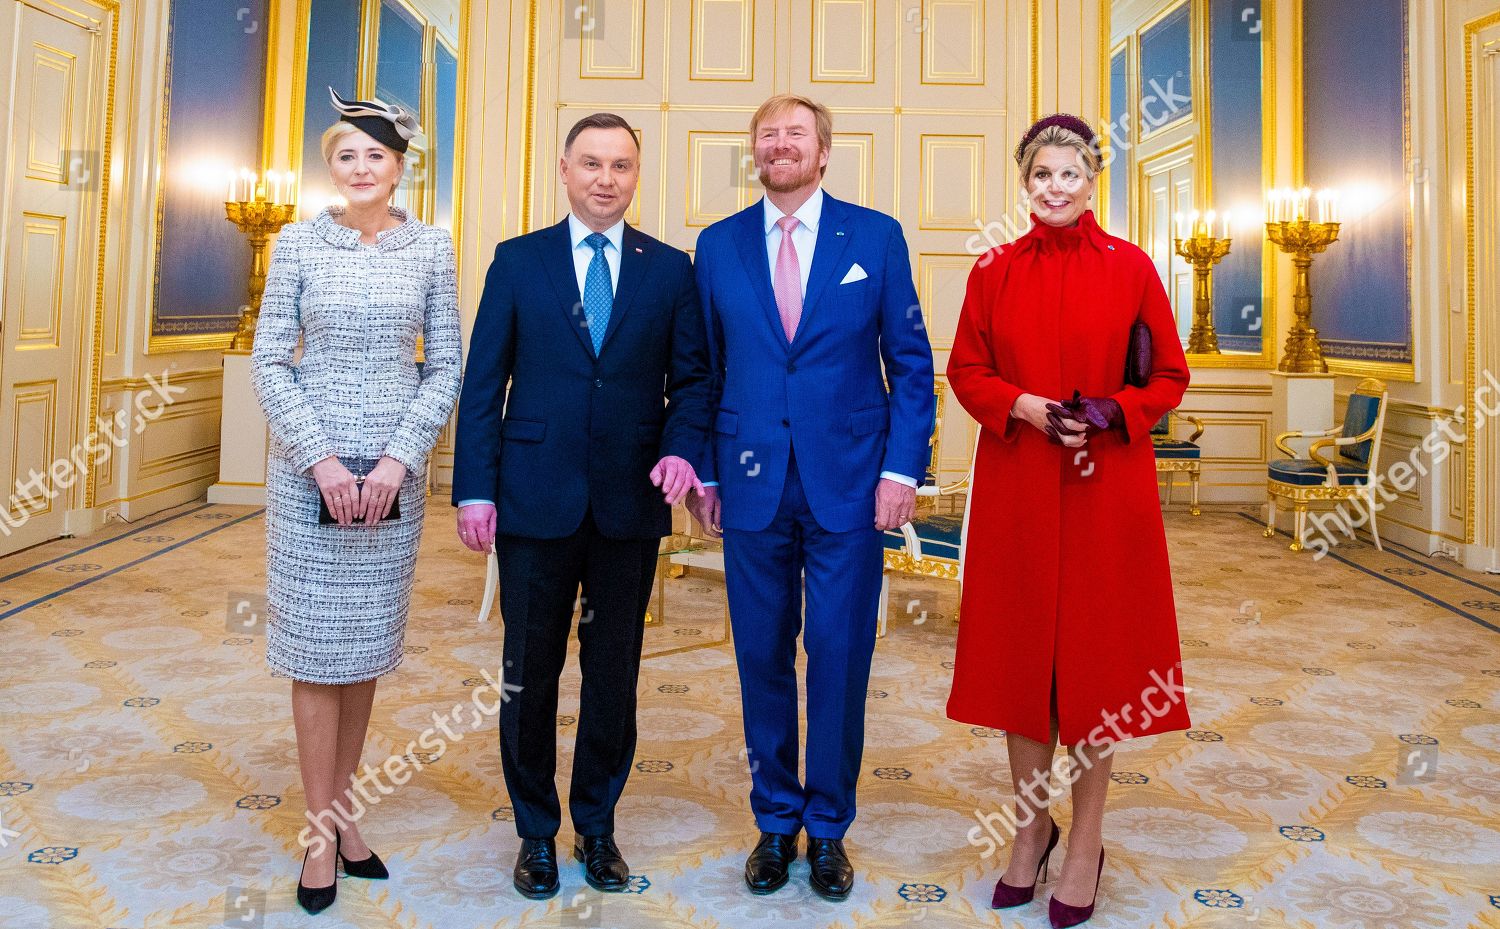 poland-president-andrzej-duda-official-visit-to-the-netherlands-shutterstock-editorial-10459439c.jpg